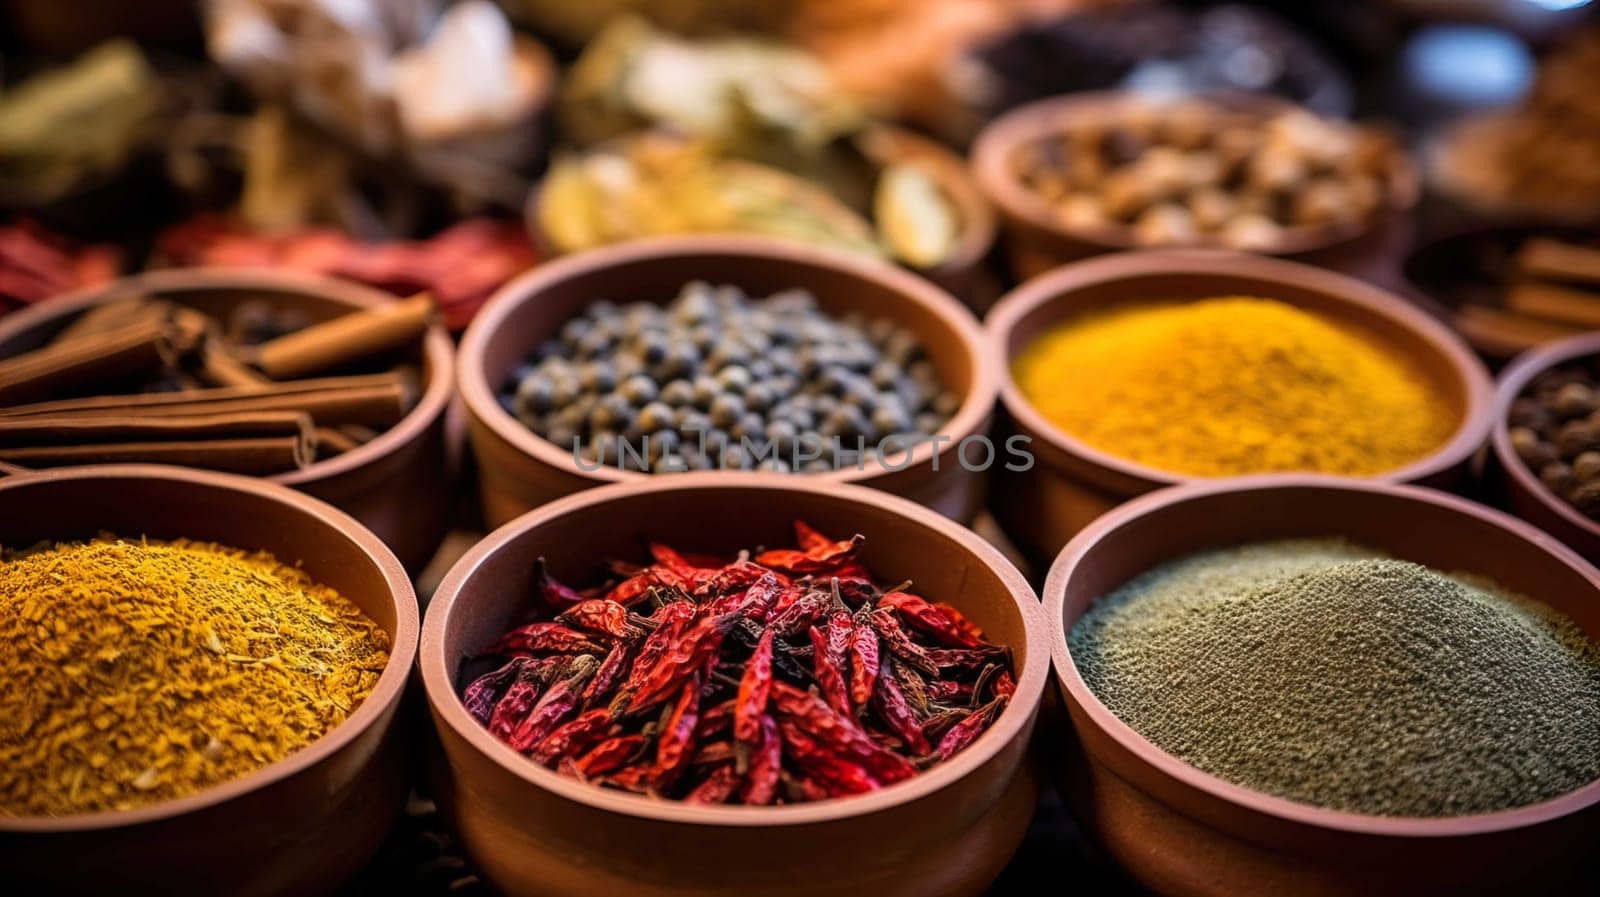   Colorful background of various herbs and spices for cooking in bowls, Spices - Seasonings, Food   India, Indian culture, Raw materials for banner design , Generate AI by Mrsongrphc